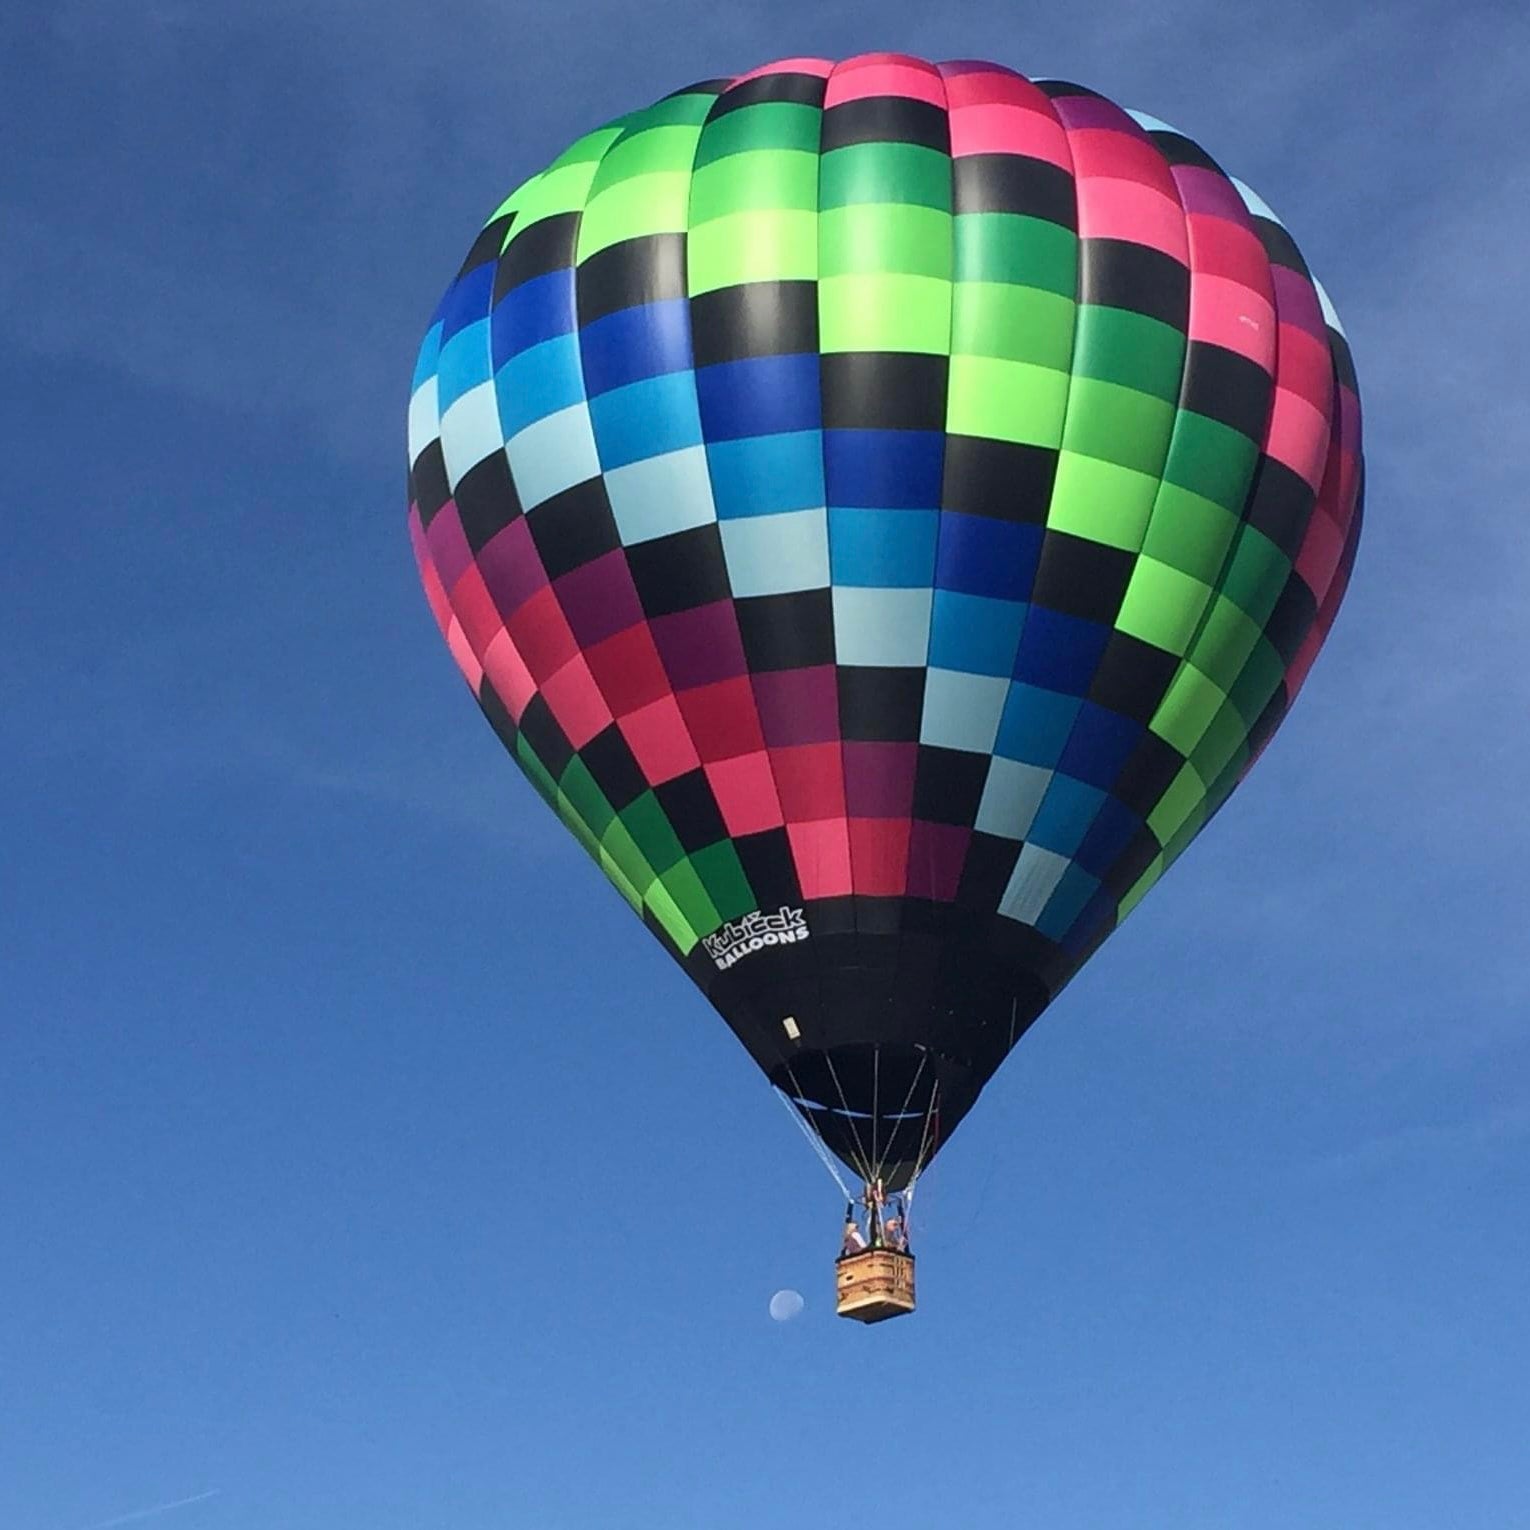 A picture of Pixie Dust (the hot air balloon) flying in the sky. Blue sky background 